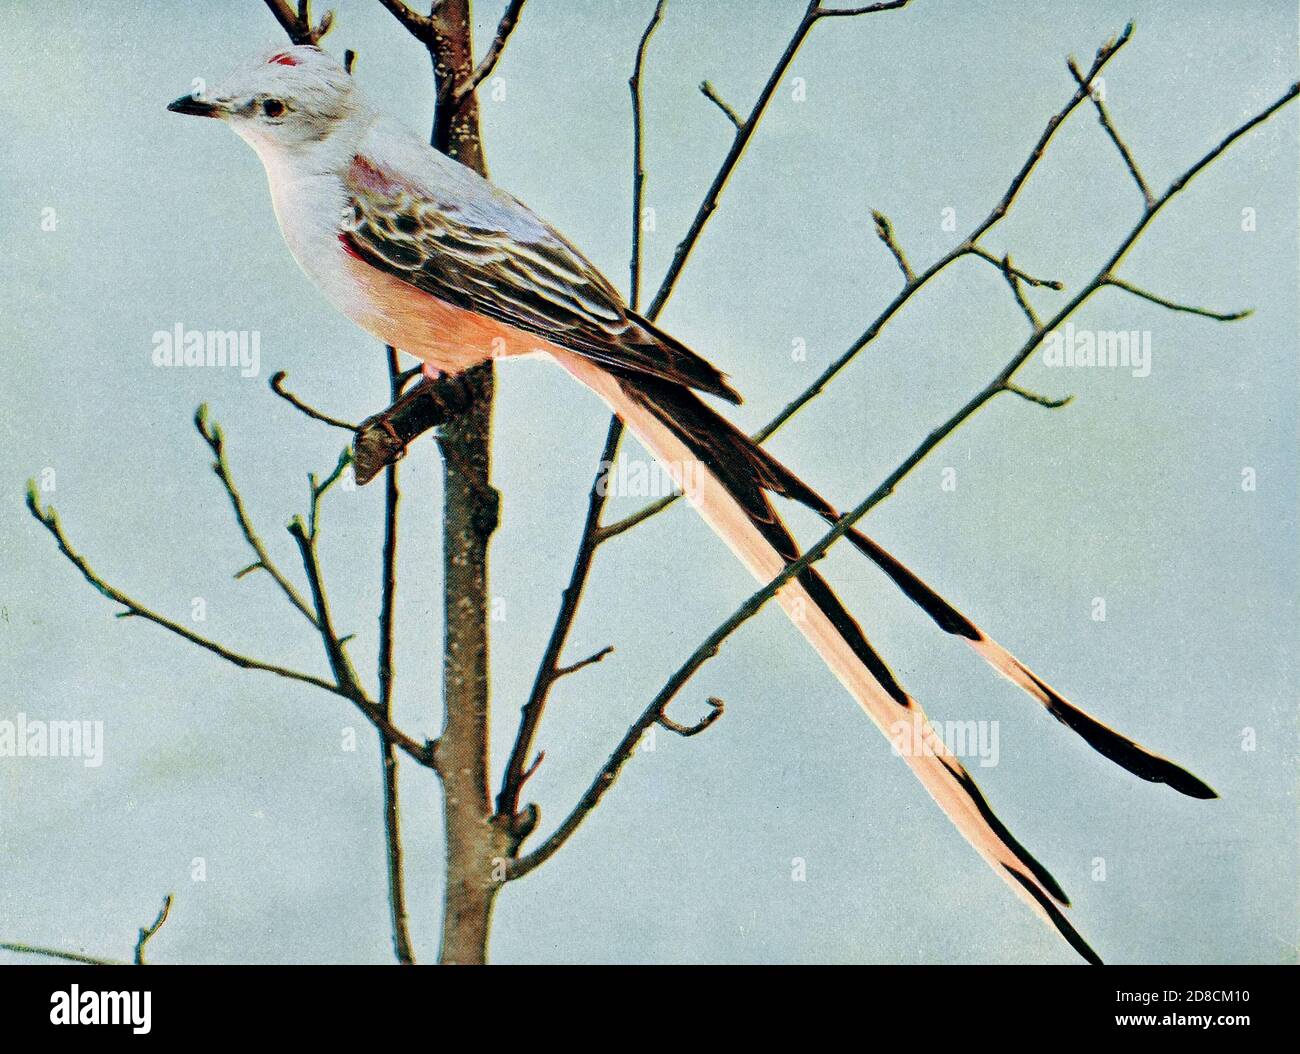 The scissor-tailed flycatcher (Tyrannus forficatus), also known as the Texas bird-of-paradise and swallow-tailed flycatcher, is a long-tailed bird of the genus Tyrannus, whose members are collectively referred to as kingbirds. The kingbirds are a group of large insectivorous (insect-eating) birds in the tyrant flycatcher (Tyrannidae) family. The scissor-tailed flycatcher is found in North and Central America. From Birds : illustrated by color photography : a monthly serial. Knowledge of Bird-life Vol 1 No 5 May 1897 Stock Photo